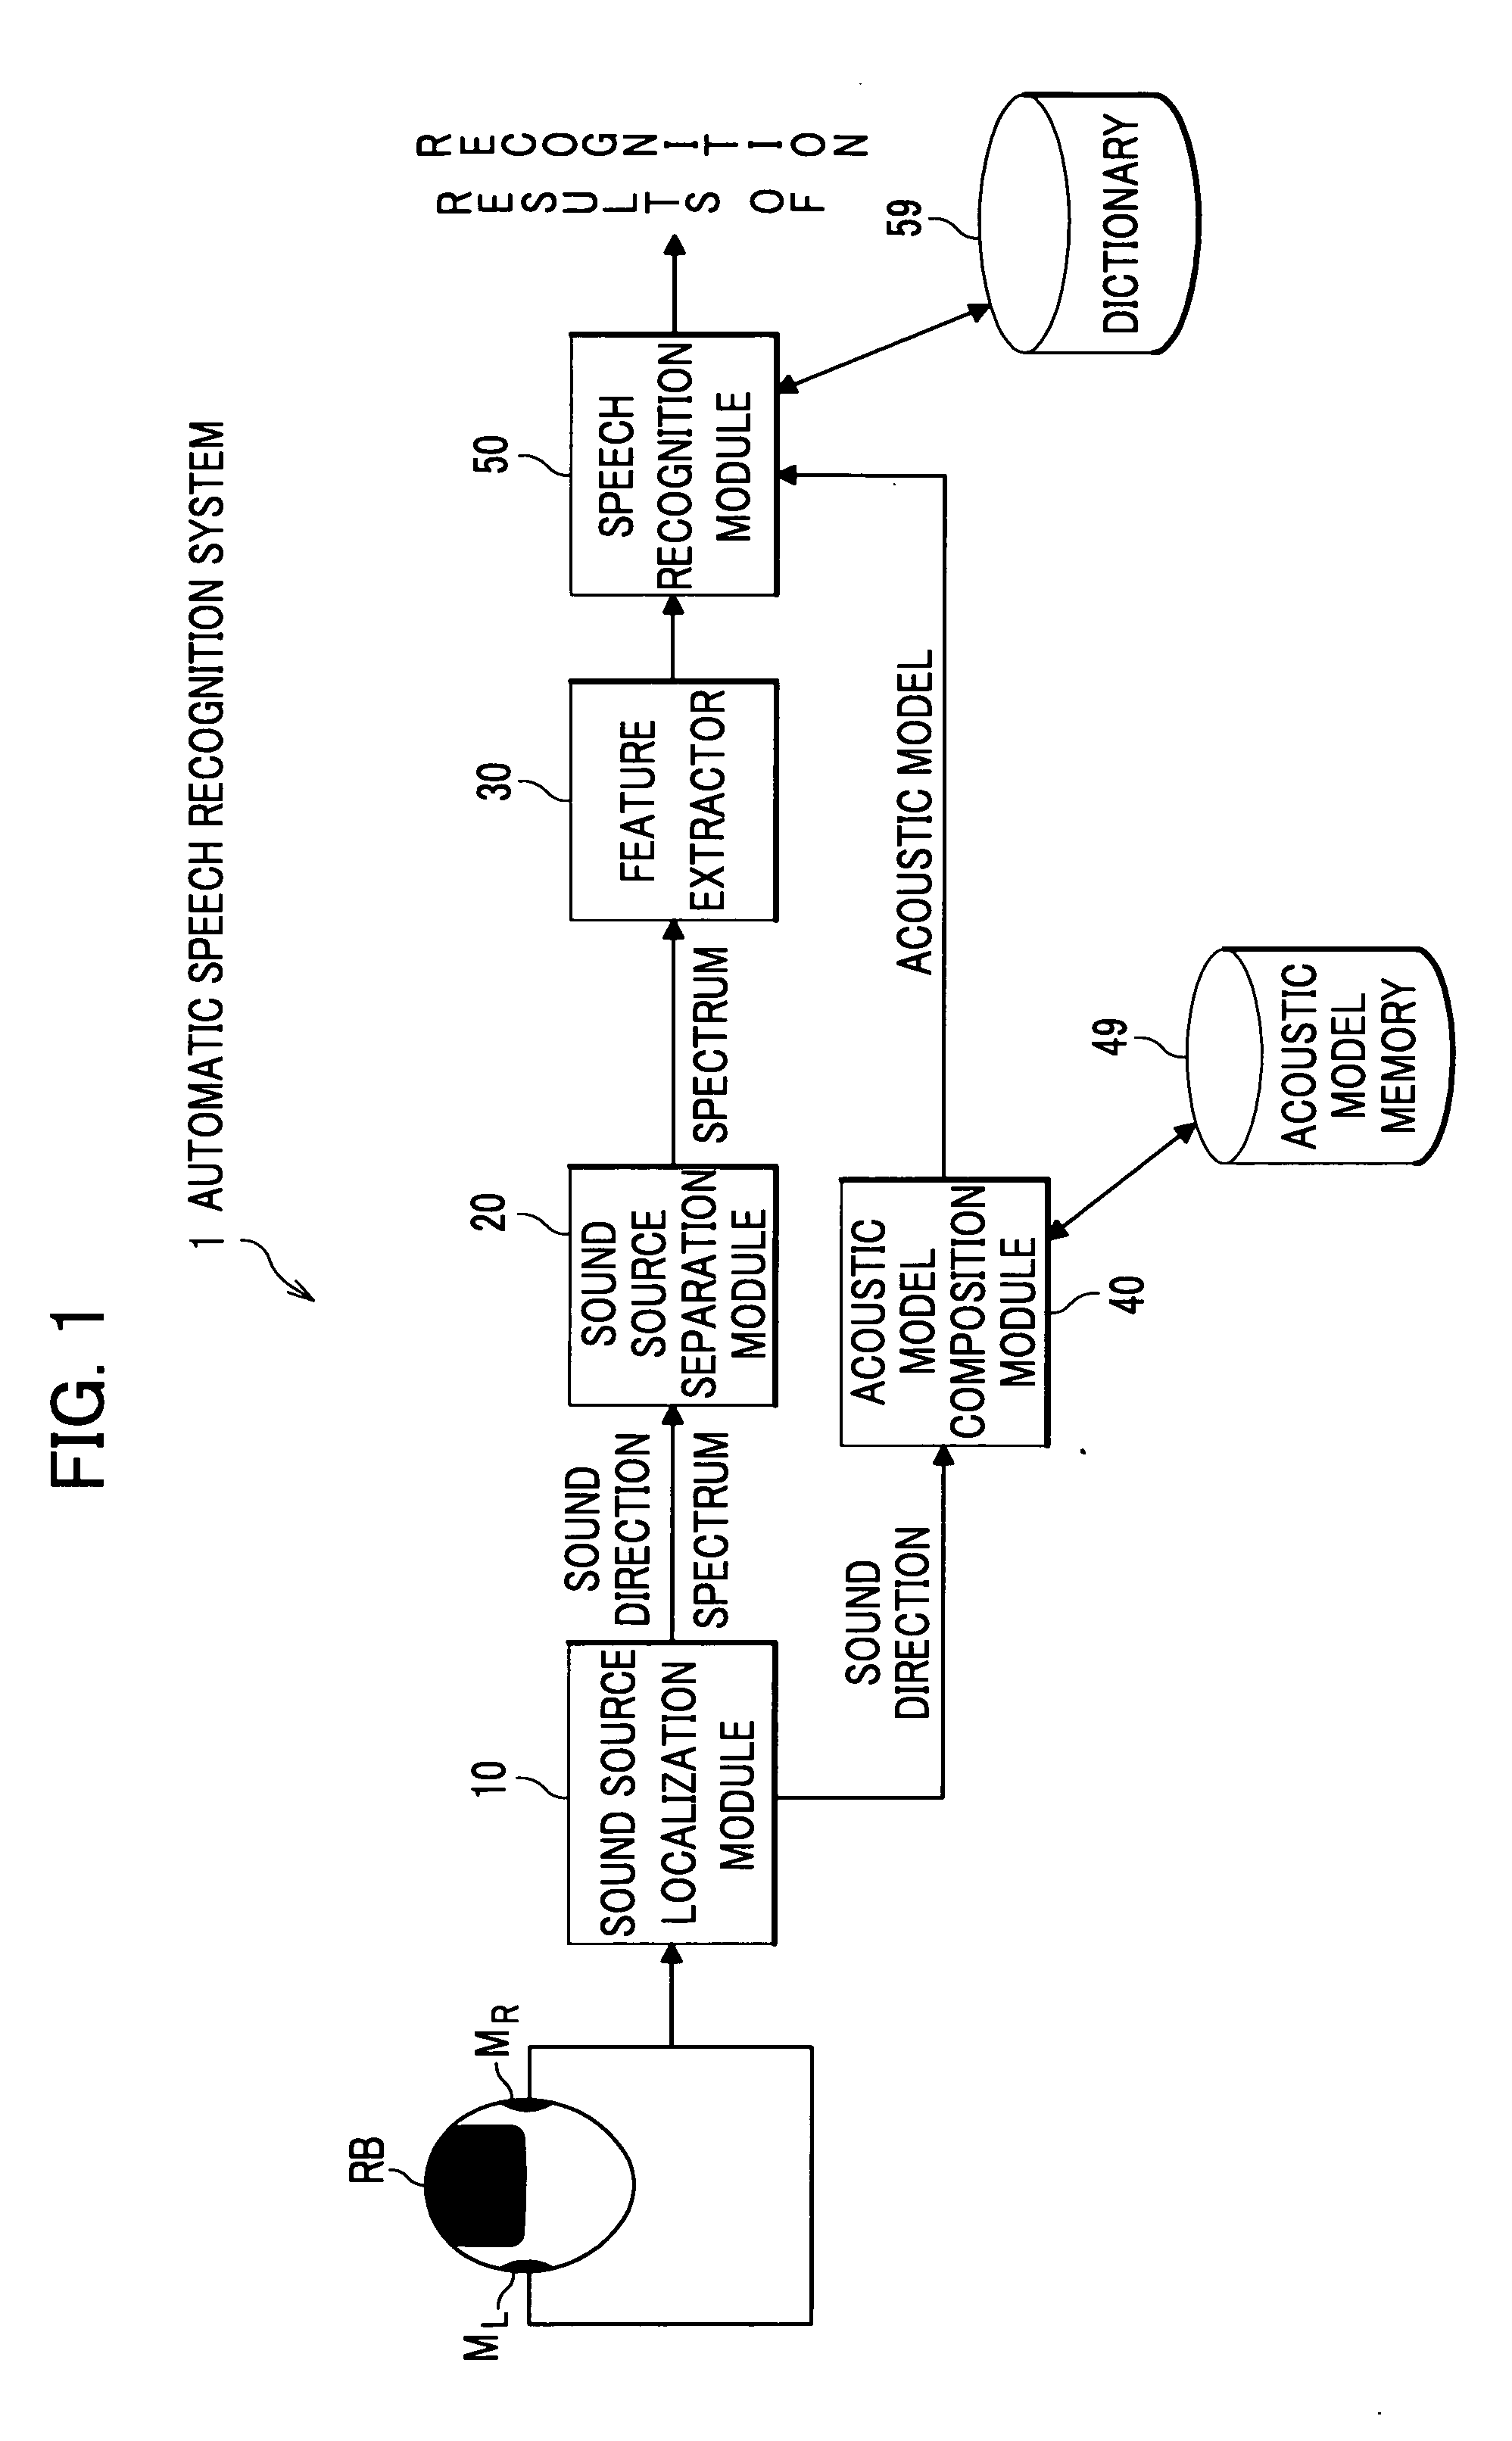 Automatic Speech Recognition System